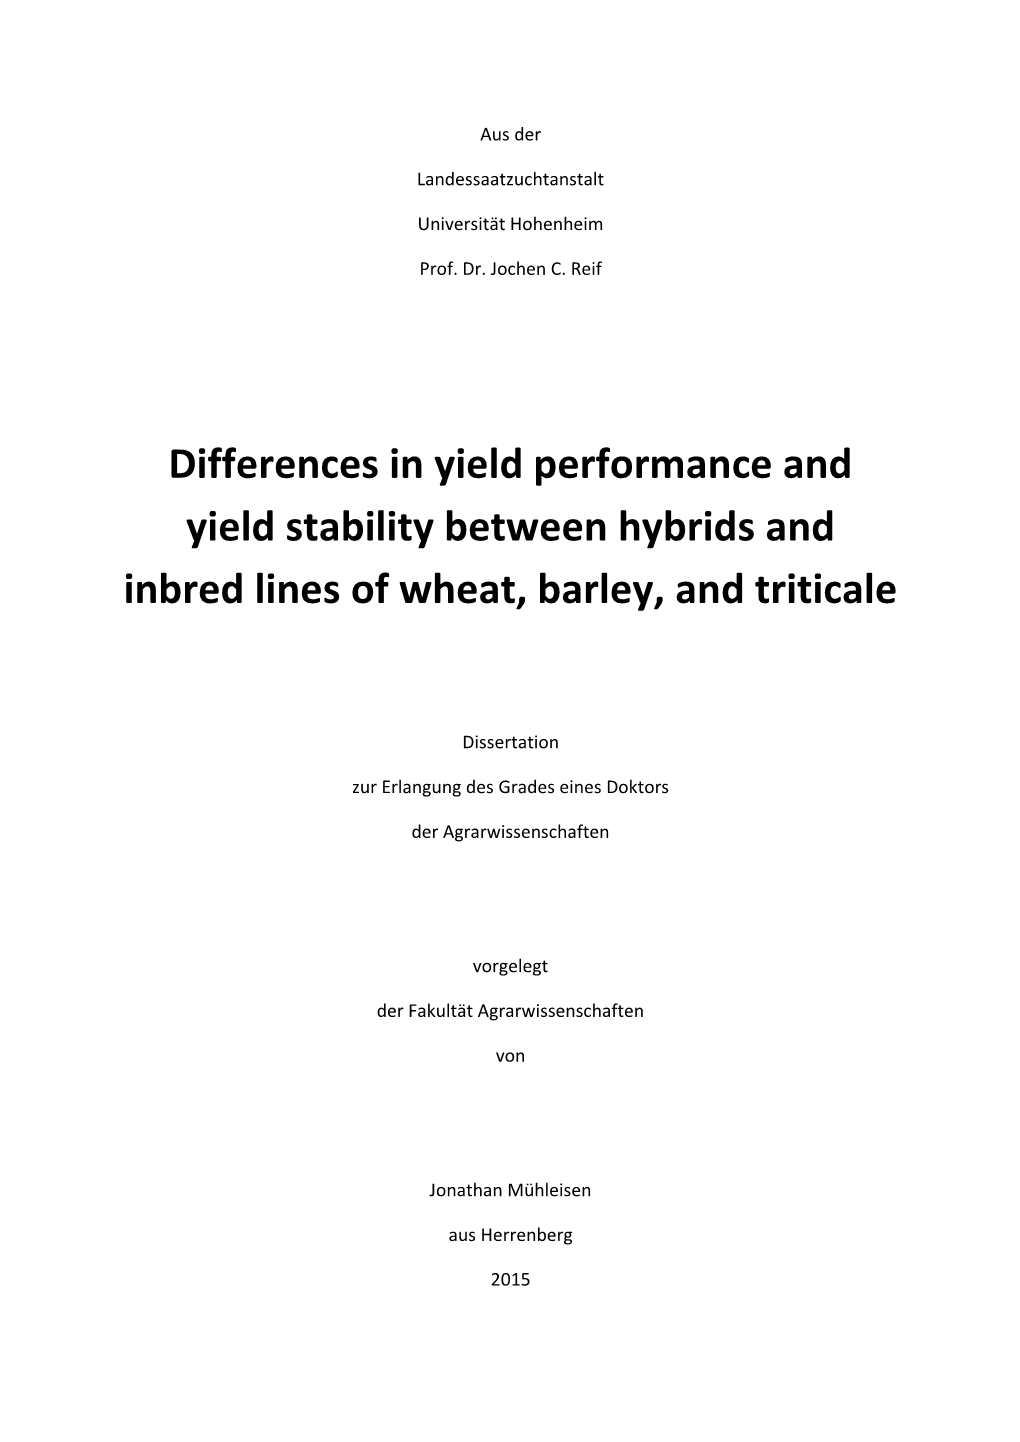 Differences in Yield Performance and Yield Stability Between Hybrids and Inbred Lines of Wheat, Barley, and Triticale